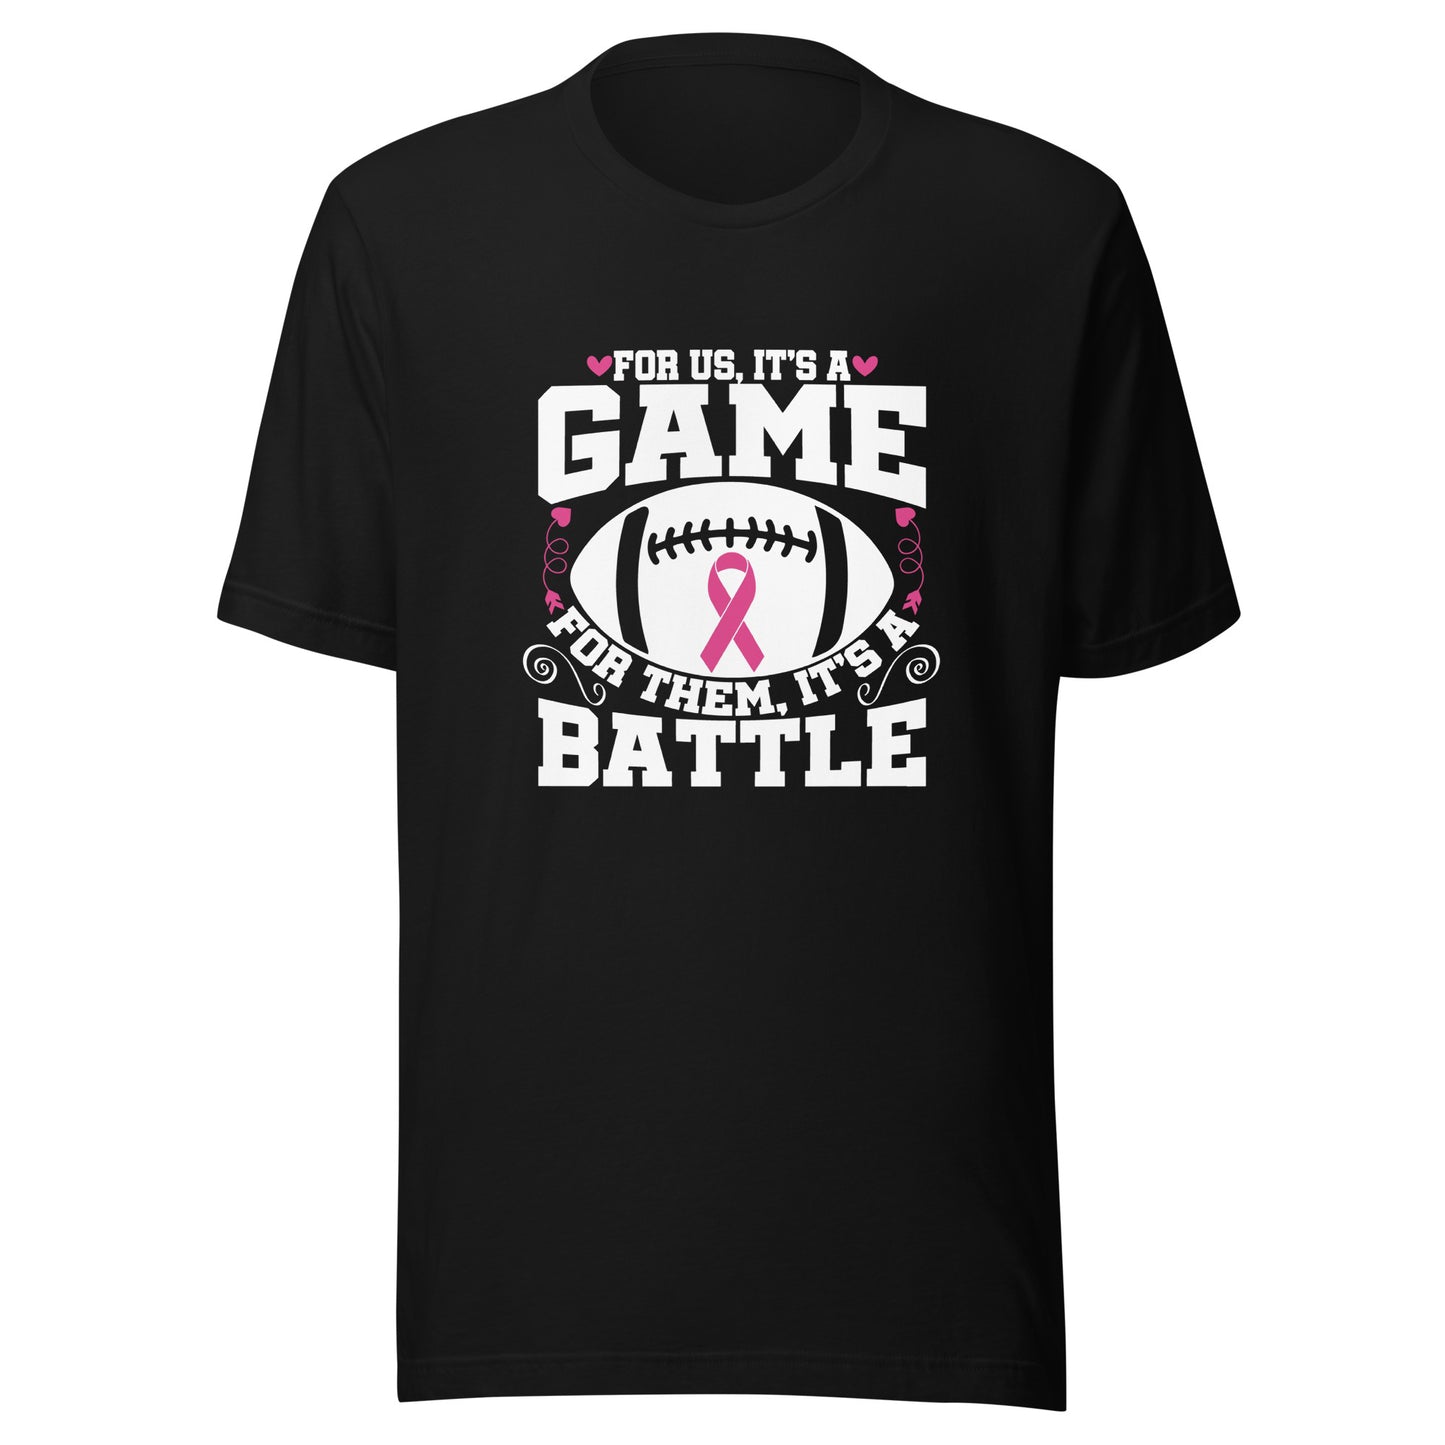 For Us It’s A Game For Them Its A Battle Football Breast Cancer Awareness Support Pink Ribbon Sport Unisex T-shirt